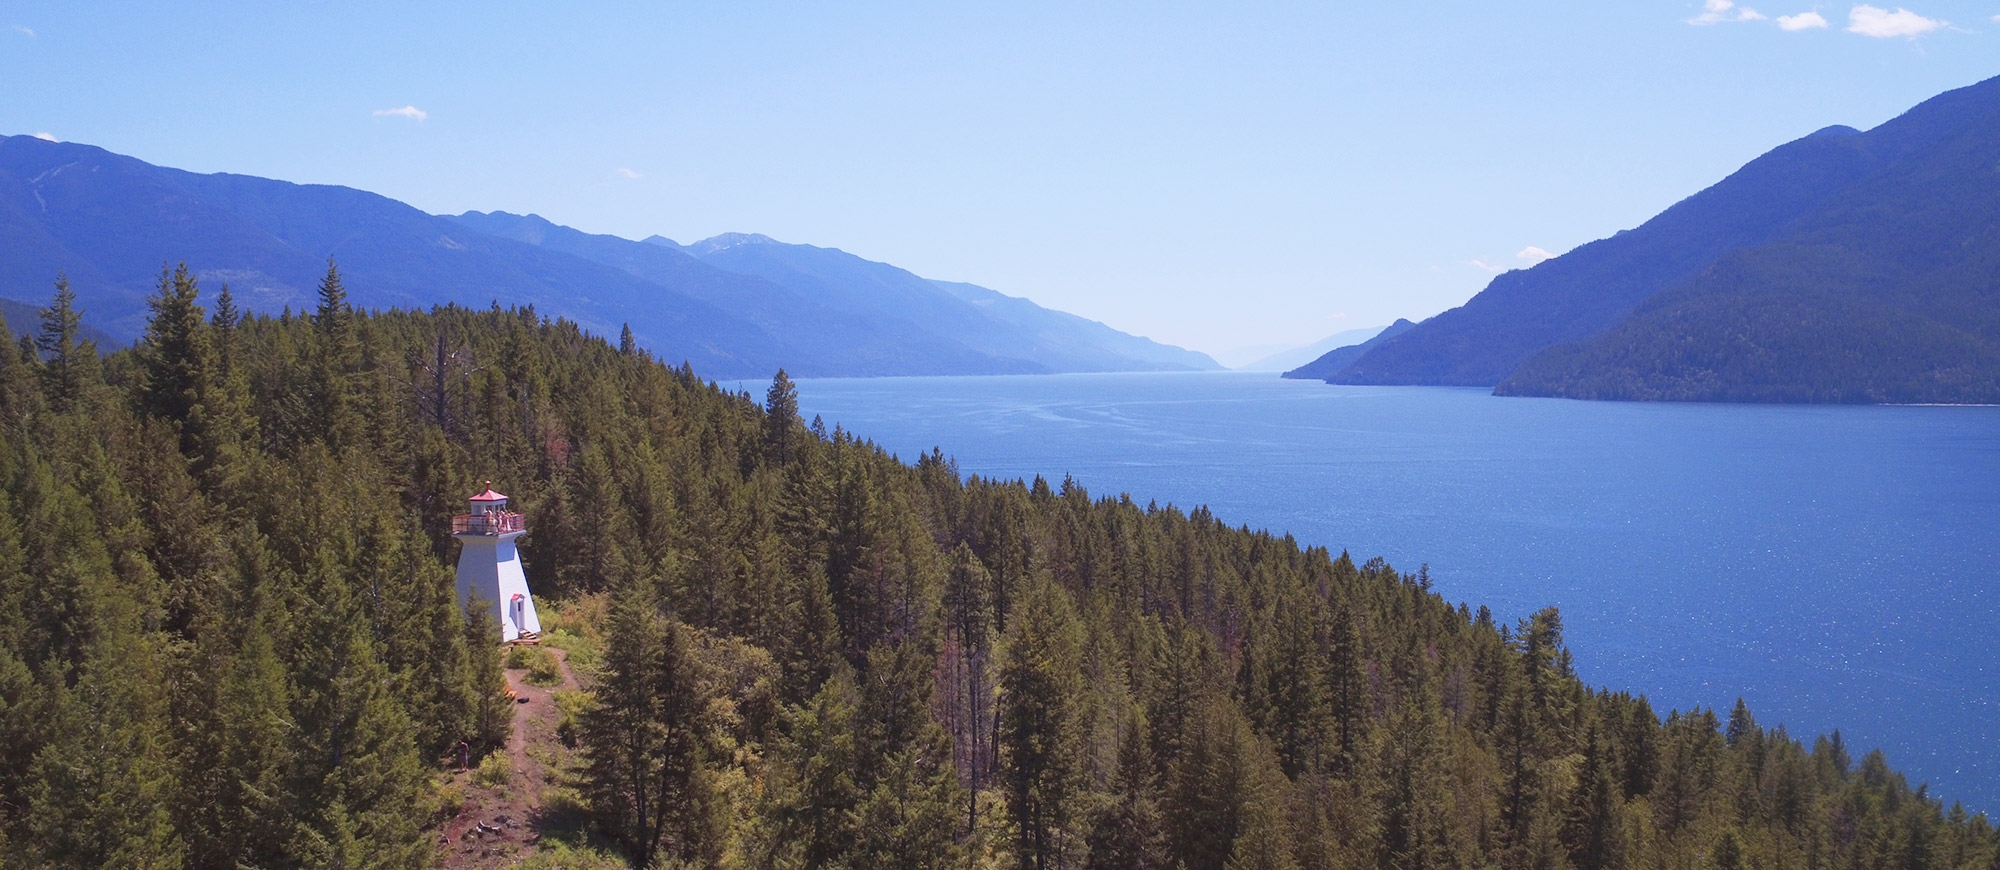 An aerial view of the Pilot Bay Lighthouse and Kootenay Lake, BC